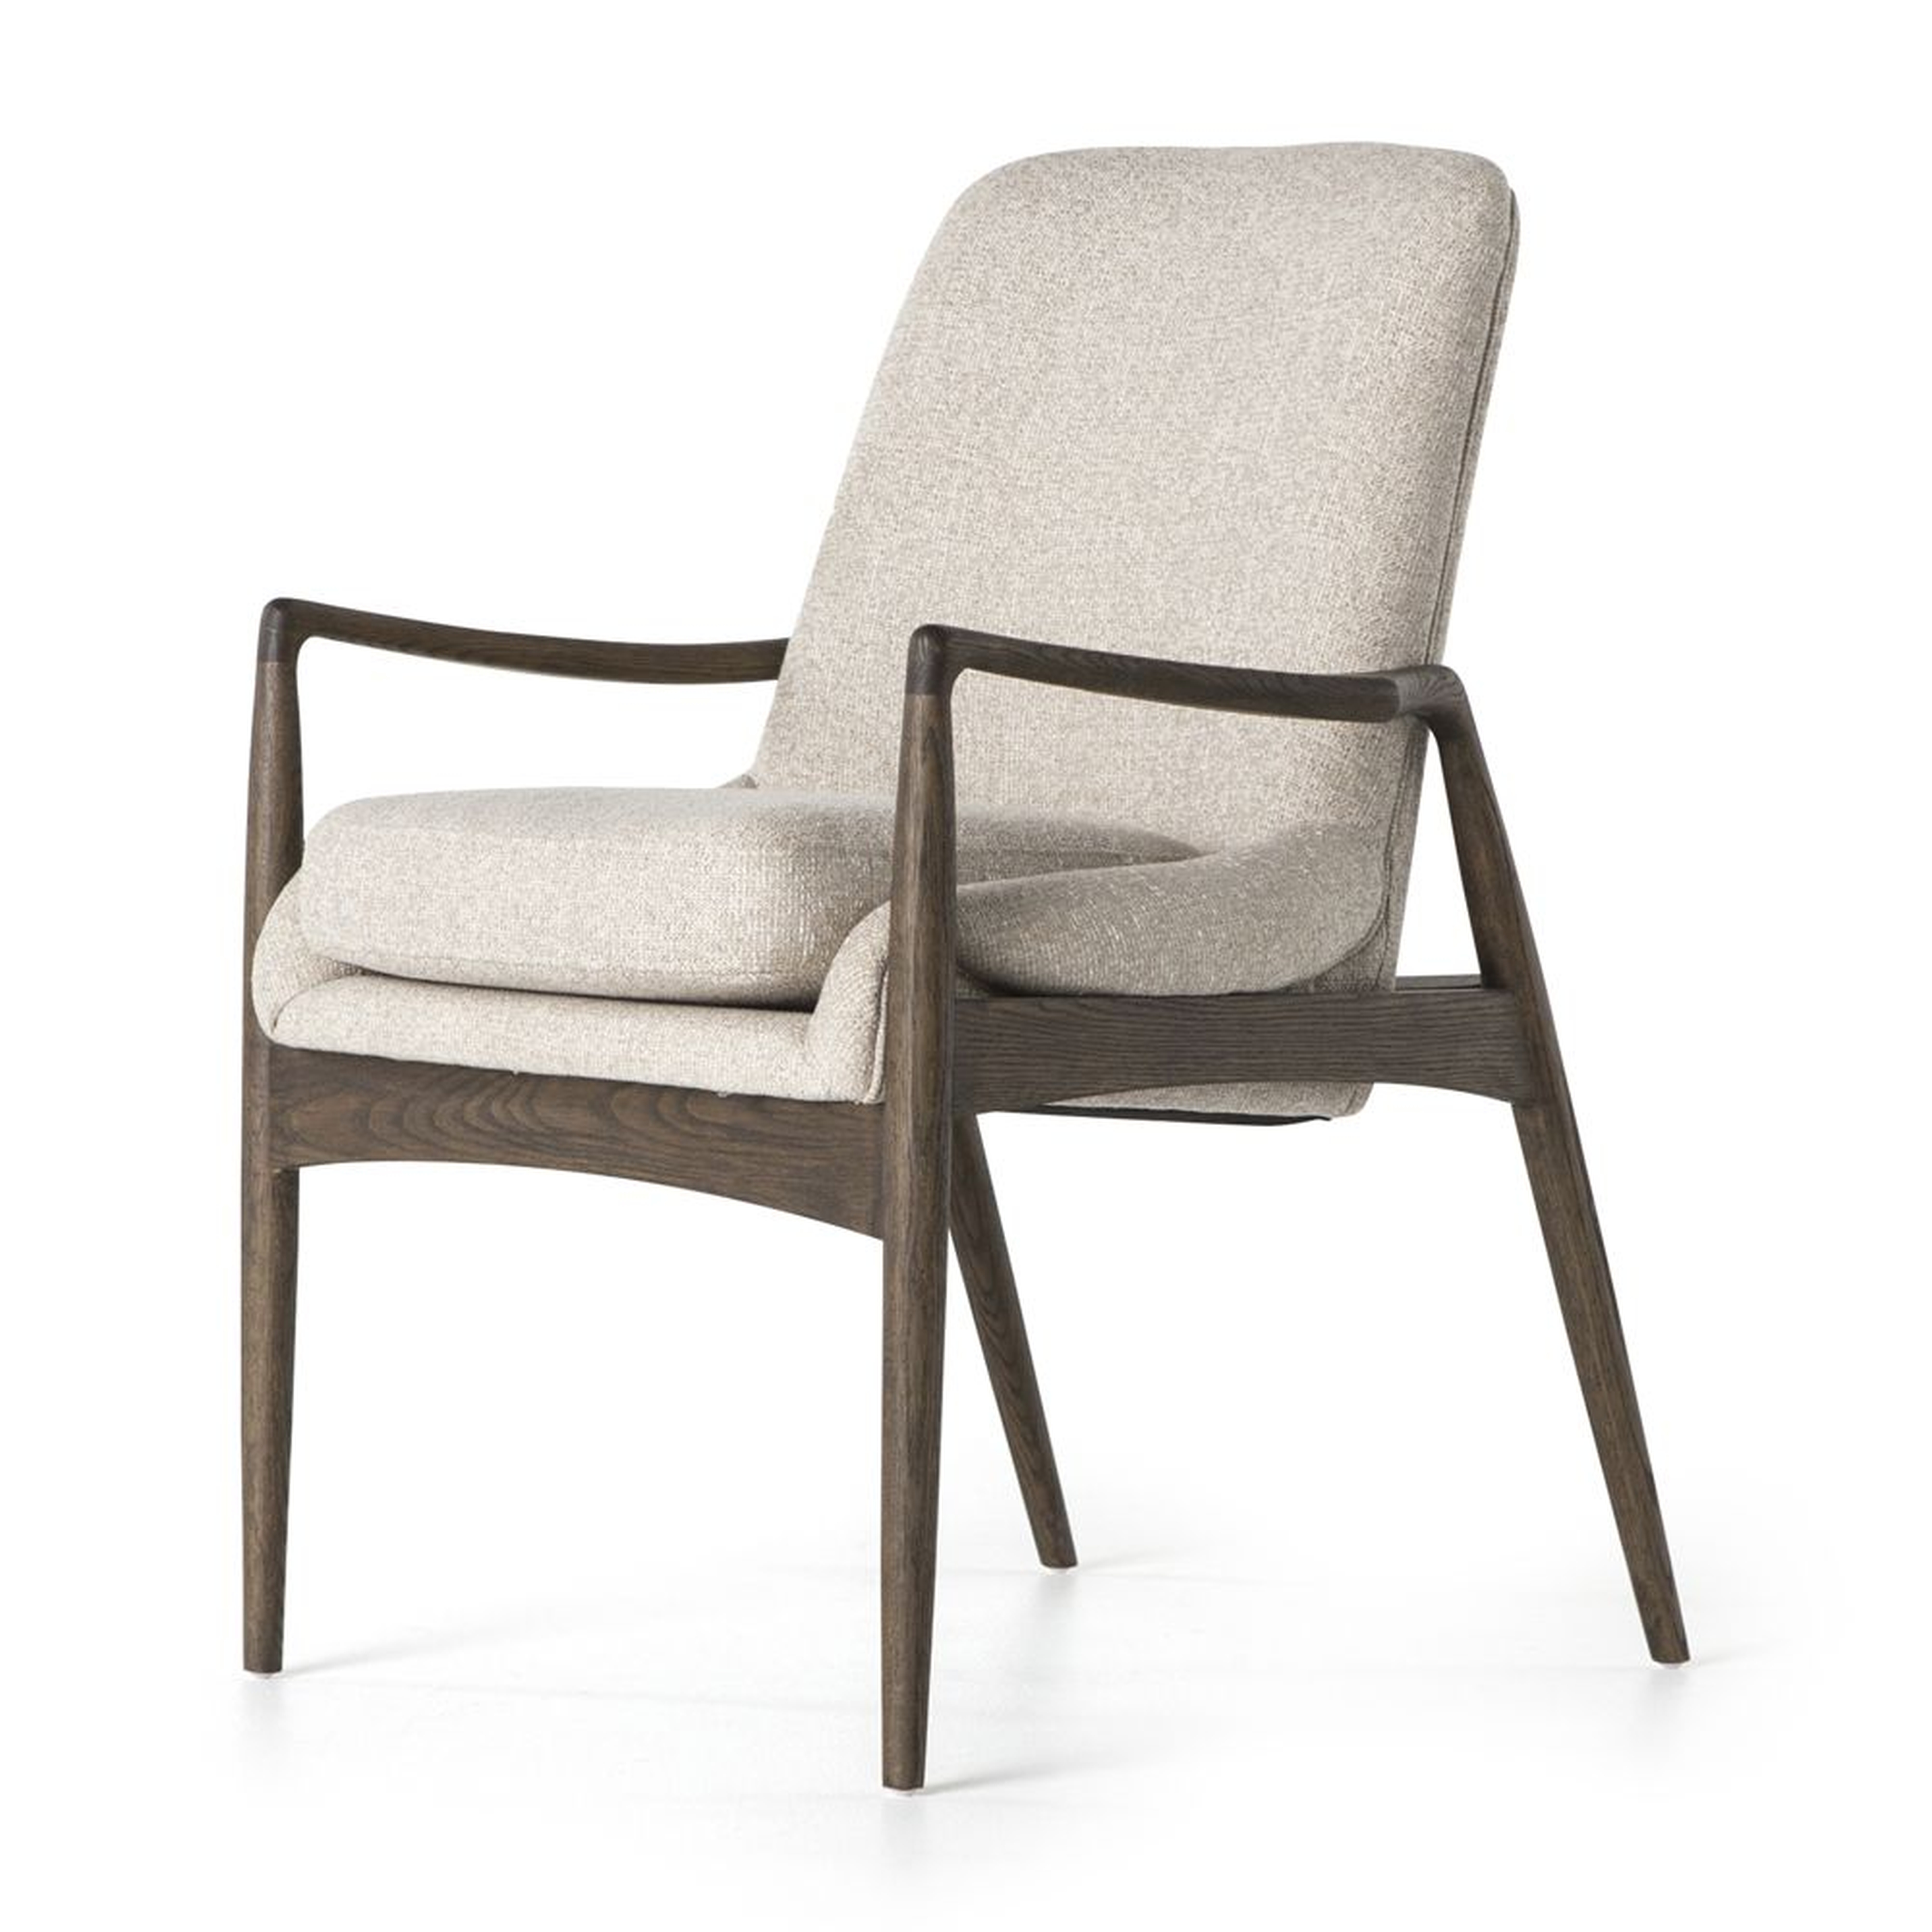 Braden Midcentury Dining Arm Chair - Crate and Barrel